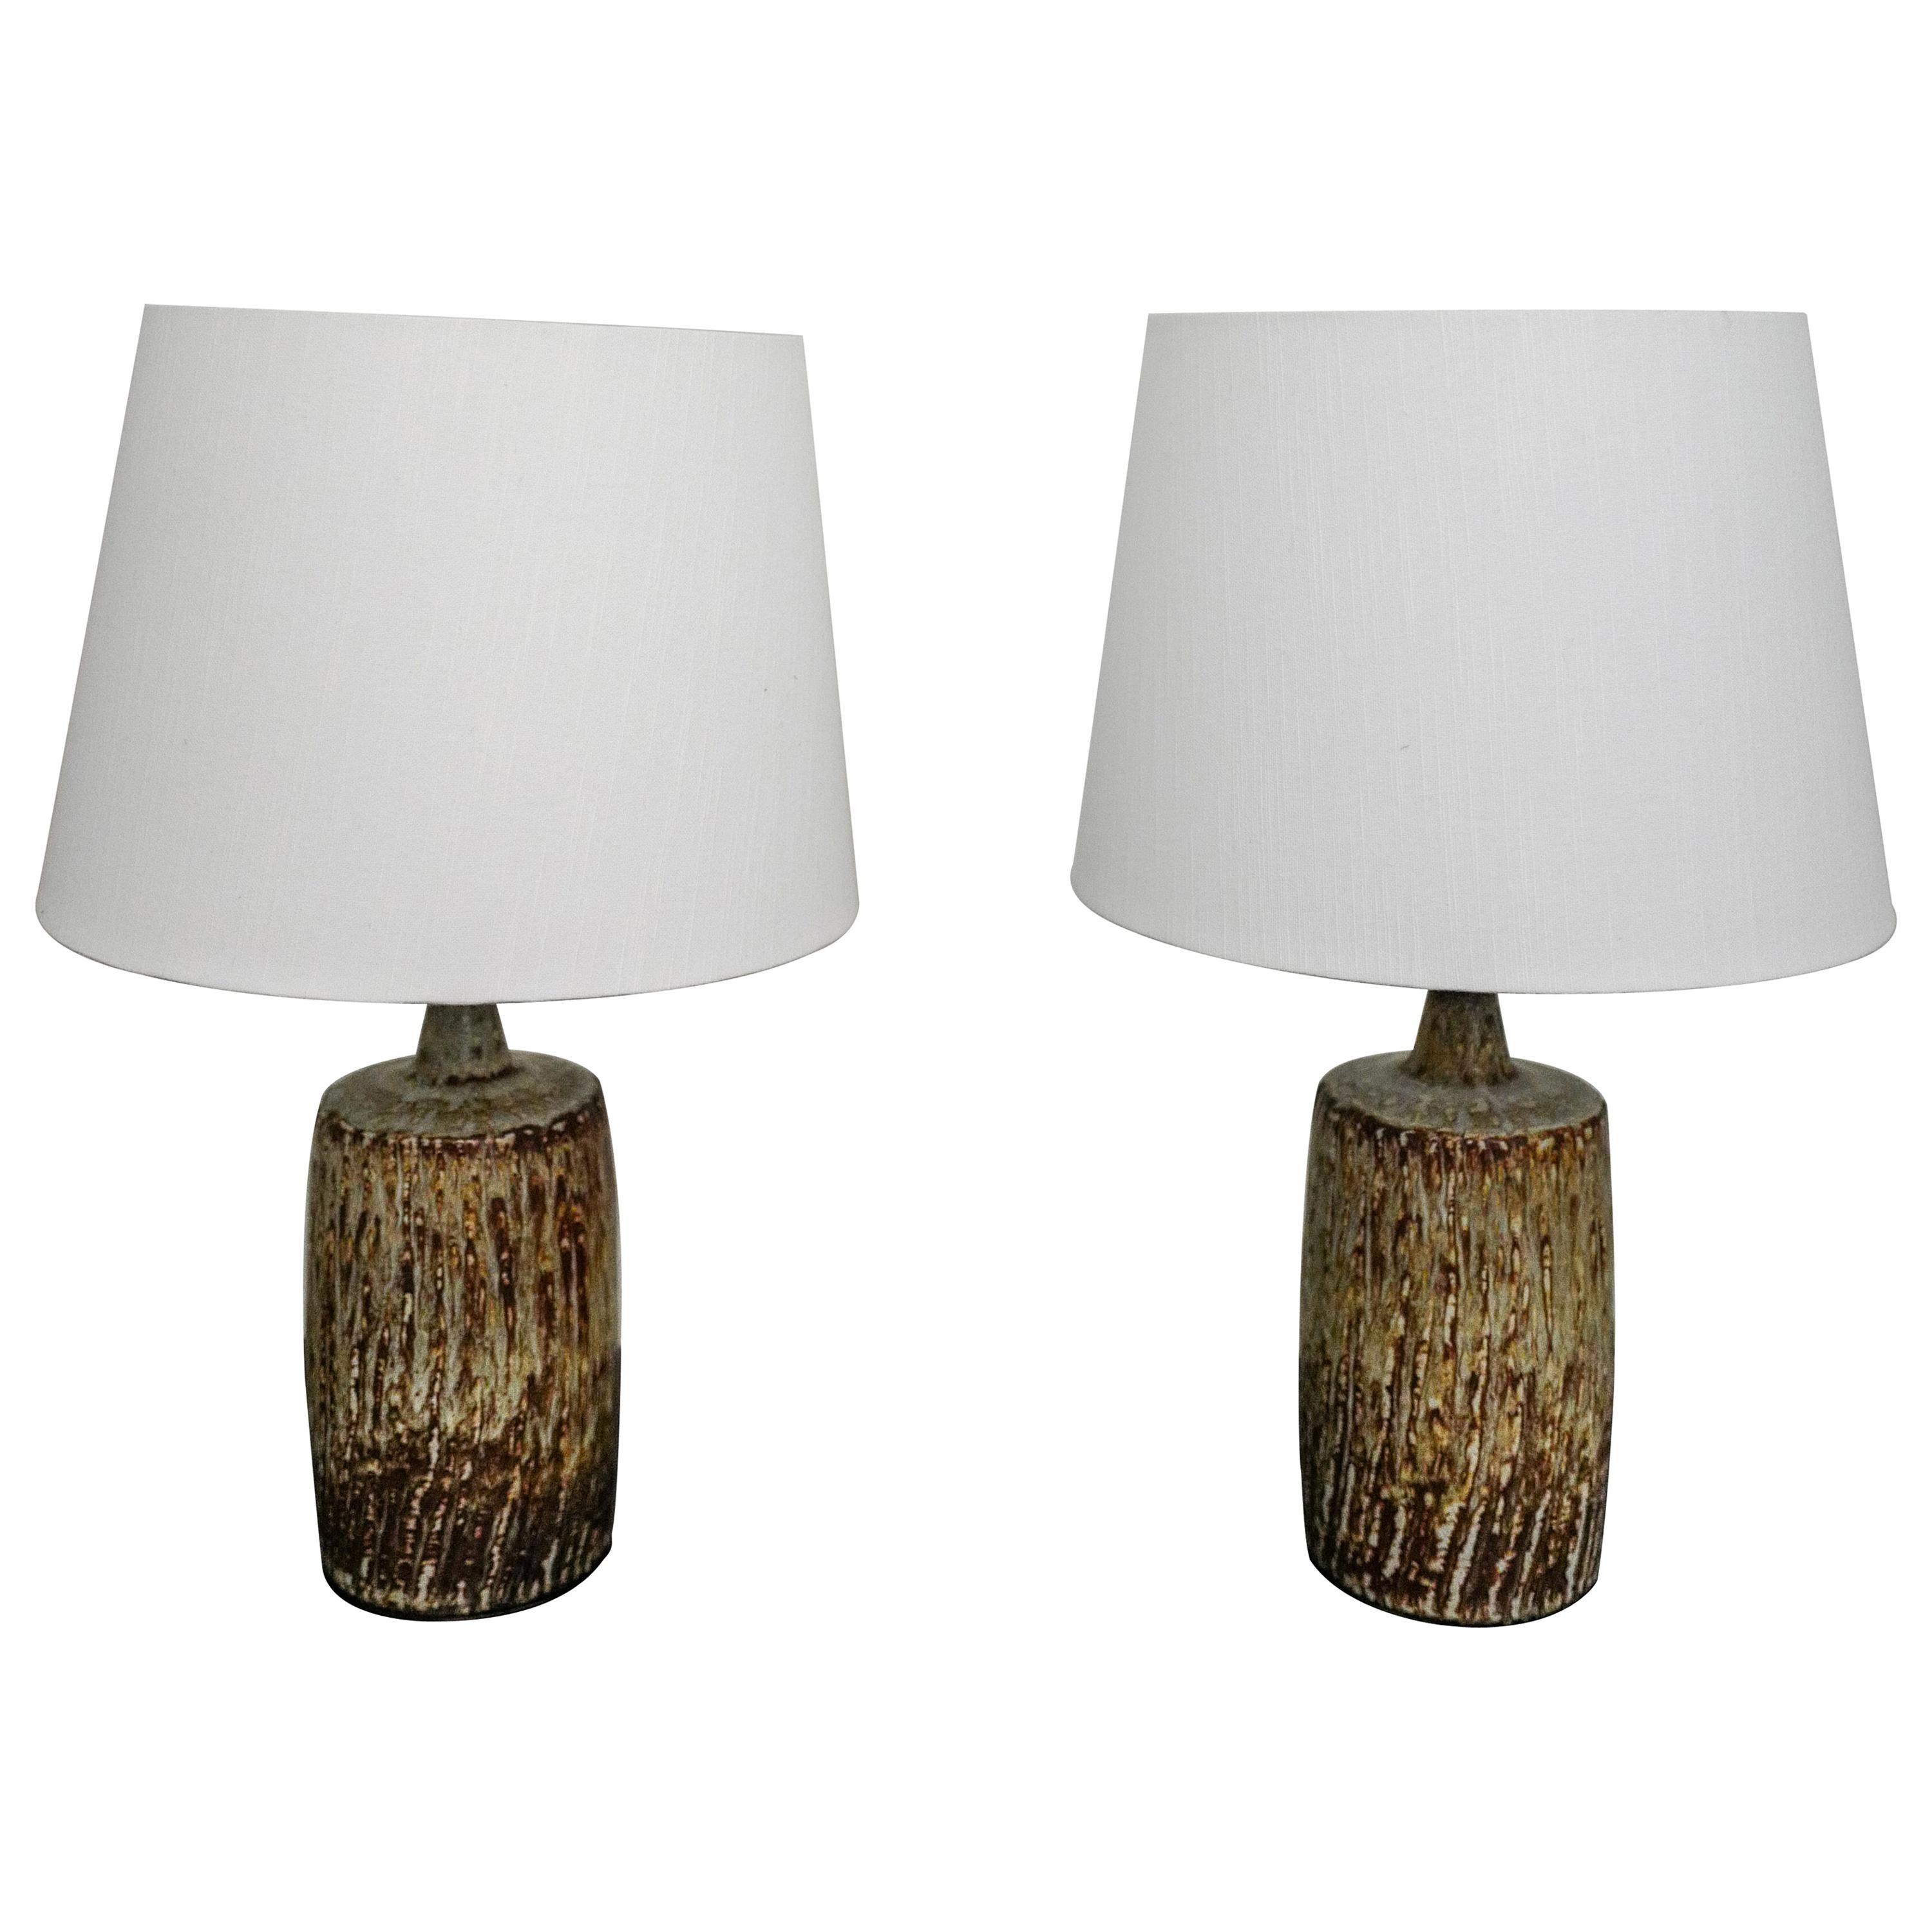 Pair of Gunnar Nylund "Rubus" Ceramic Table Lamps for Rörstrand 1950s, Sweden